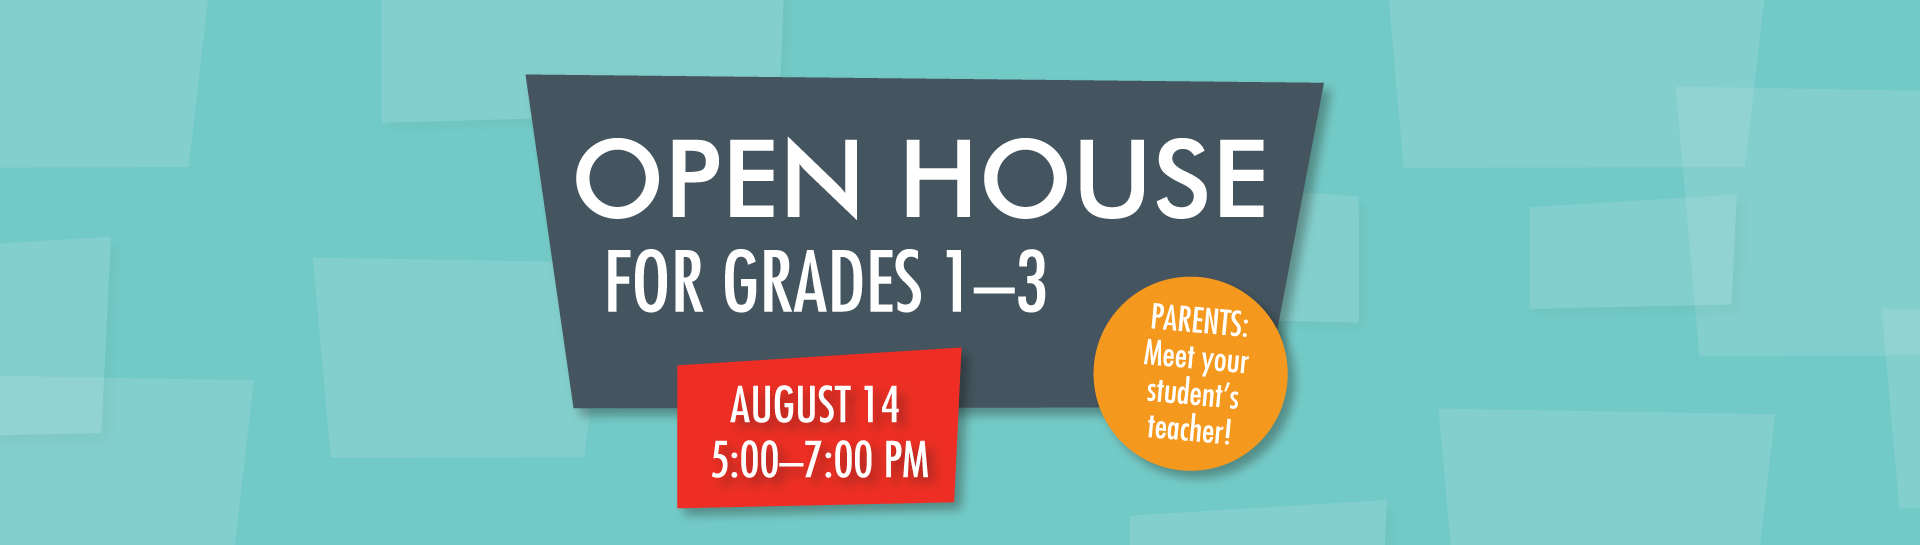 Open House for grades 1–3, August 14th